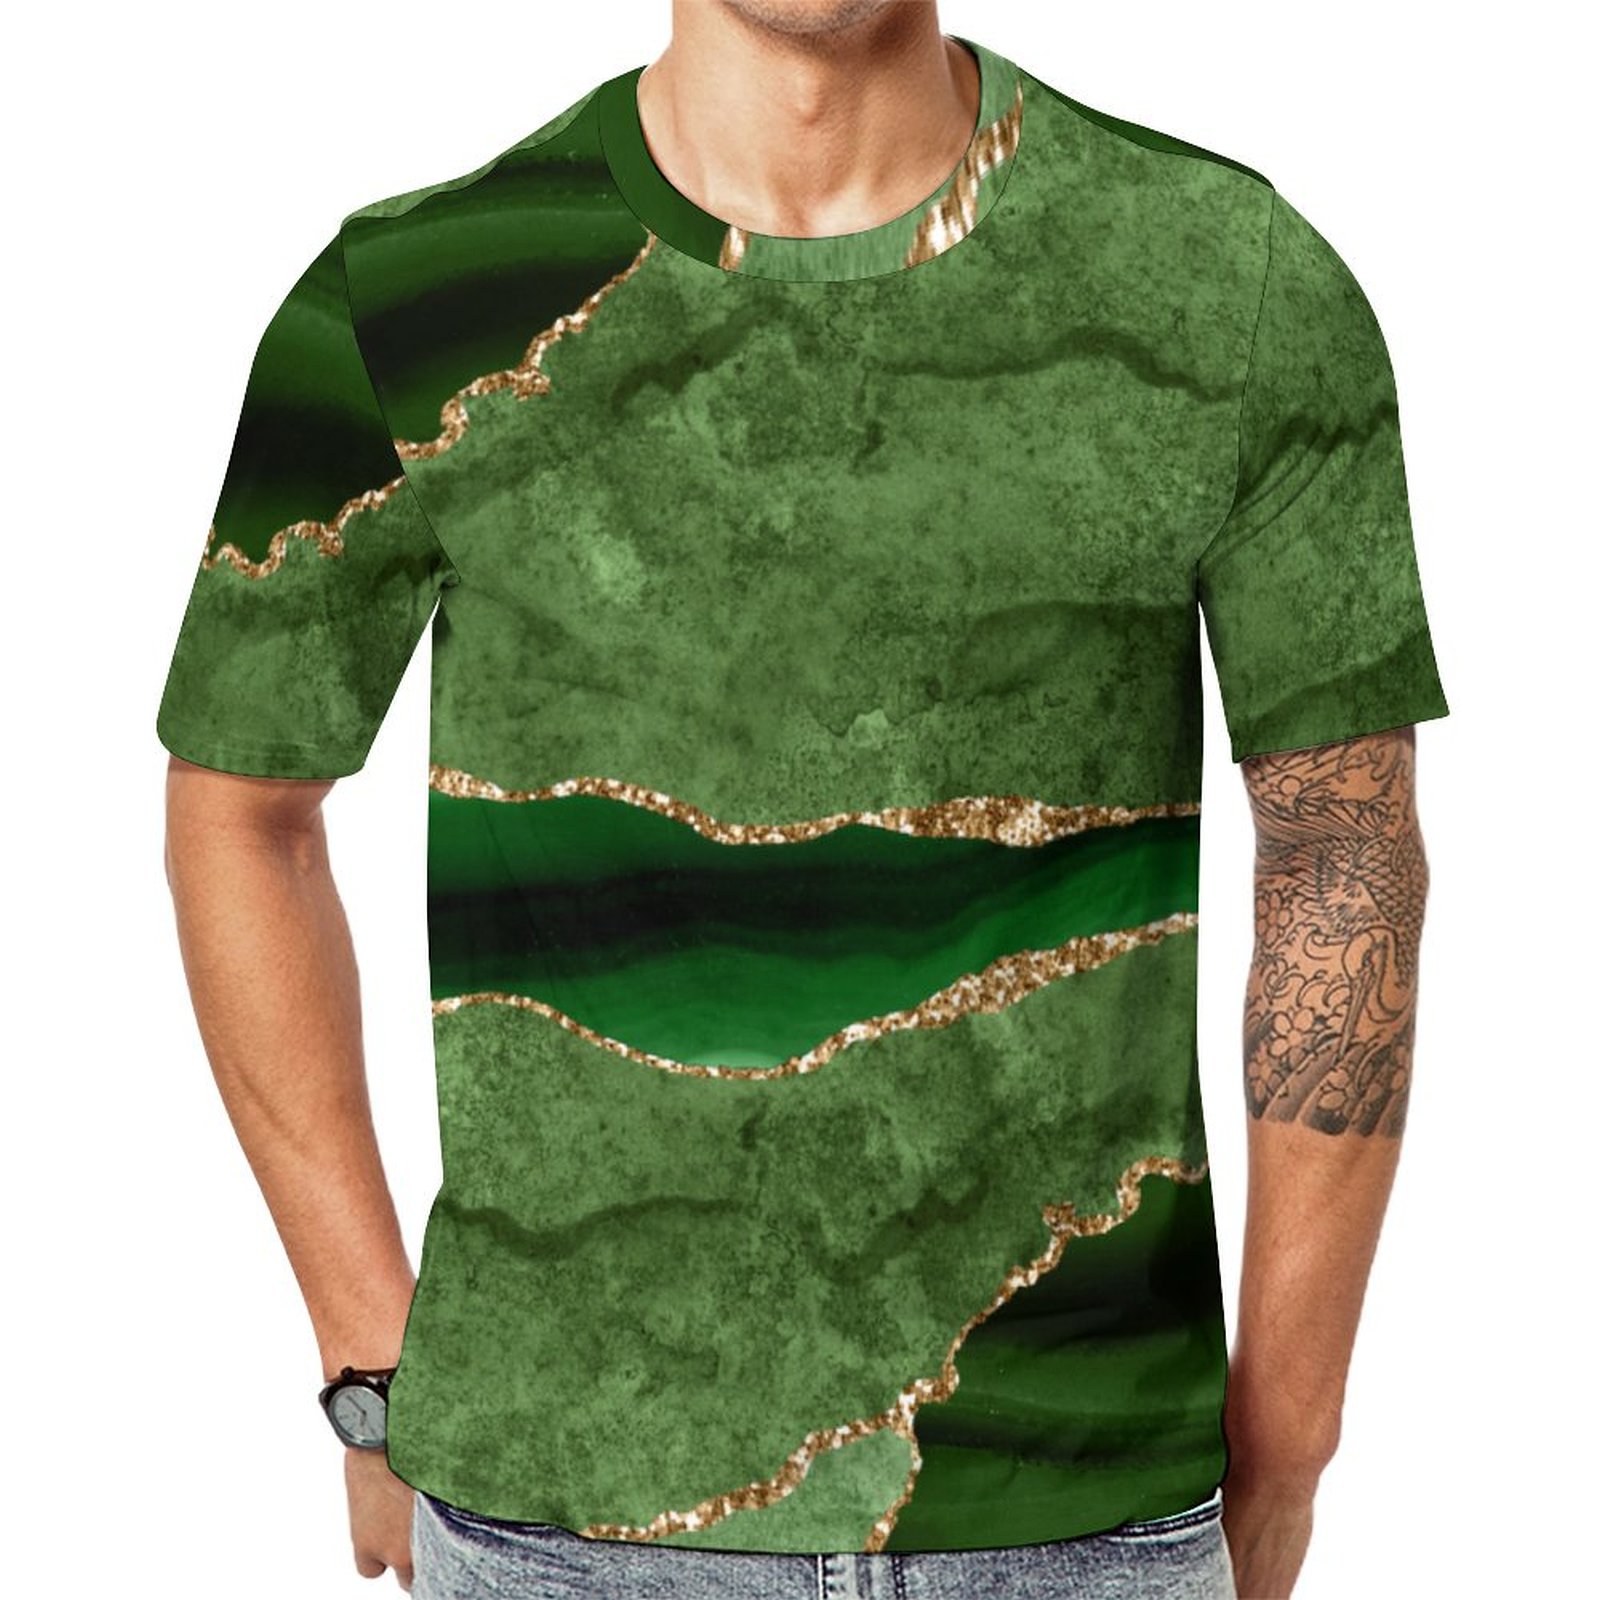 Emerald Green And Gold Agate Short Sleeve Print Unisex Tshirt Summer Casual Tees for Men and Women Coolcoshirts